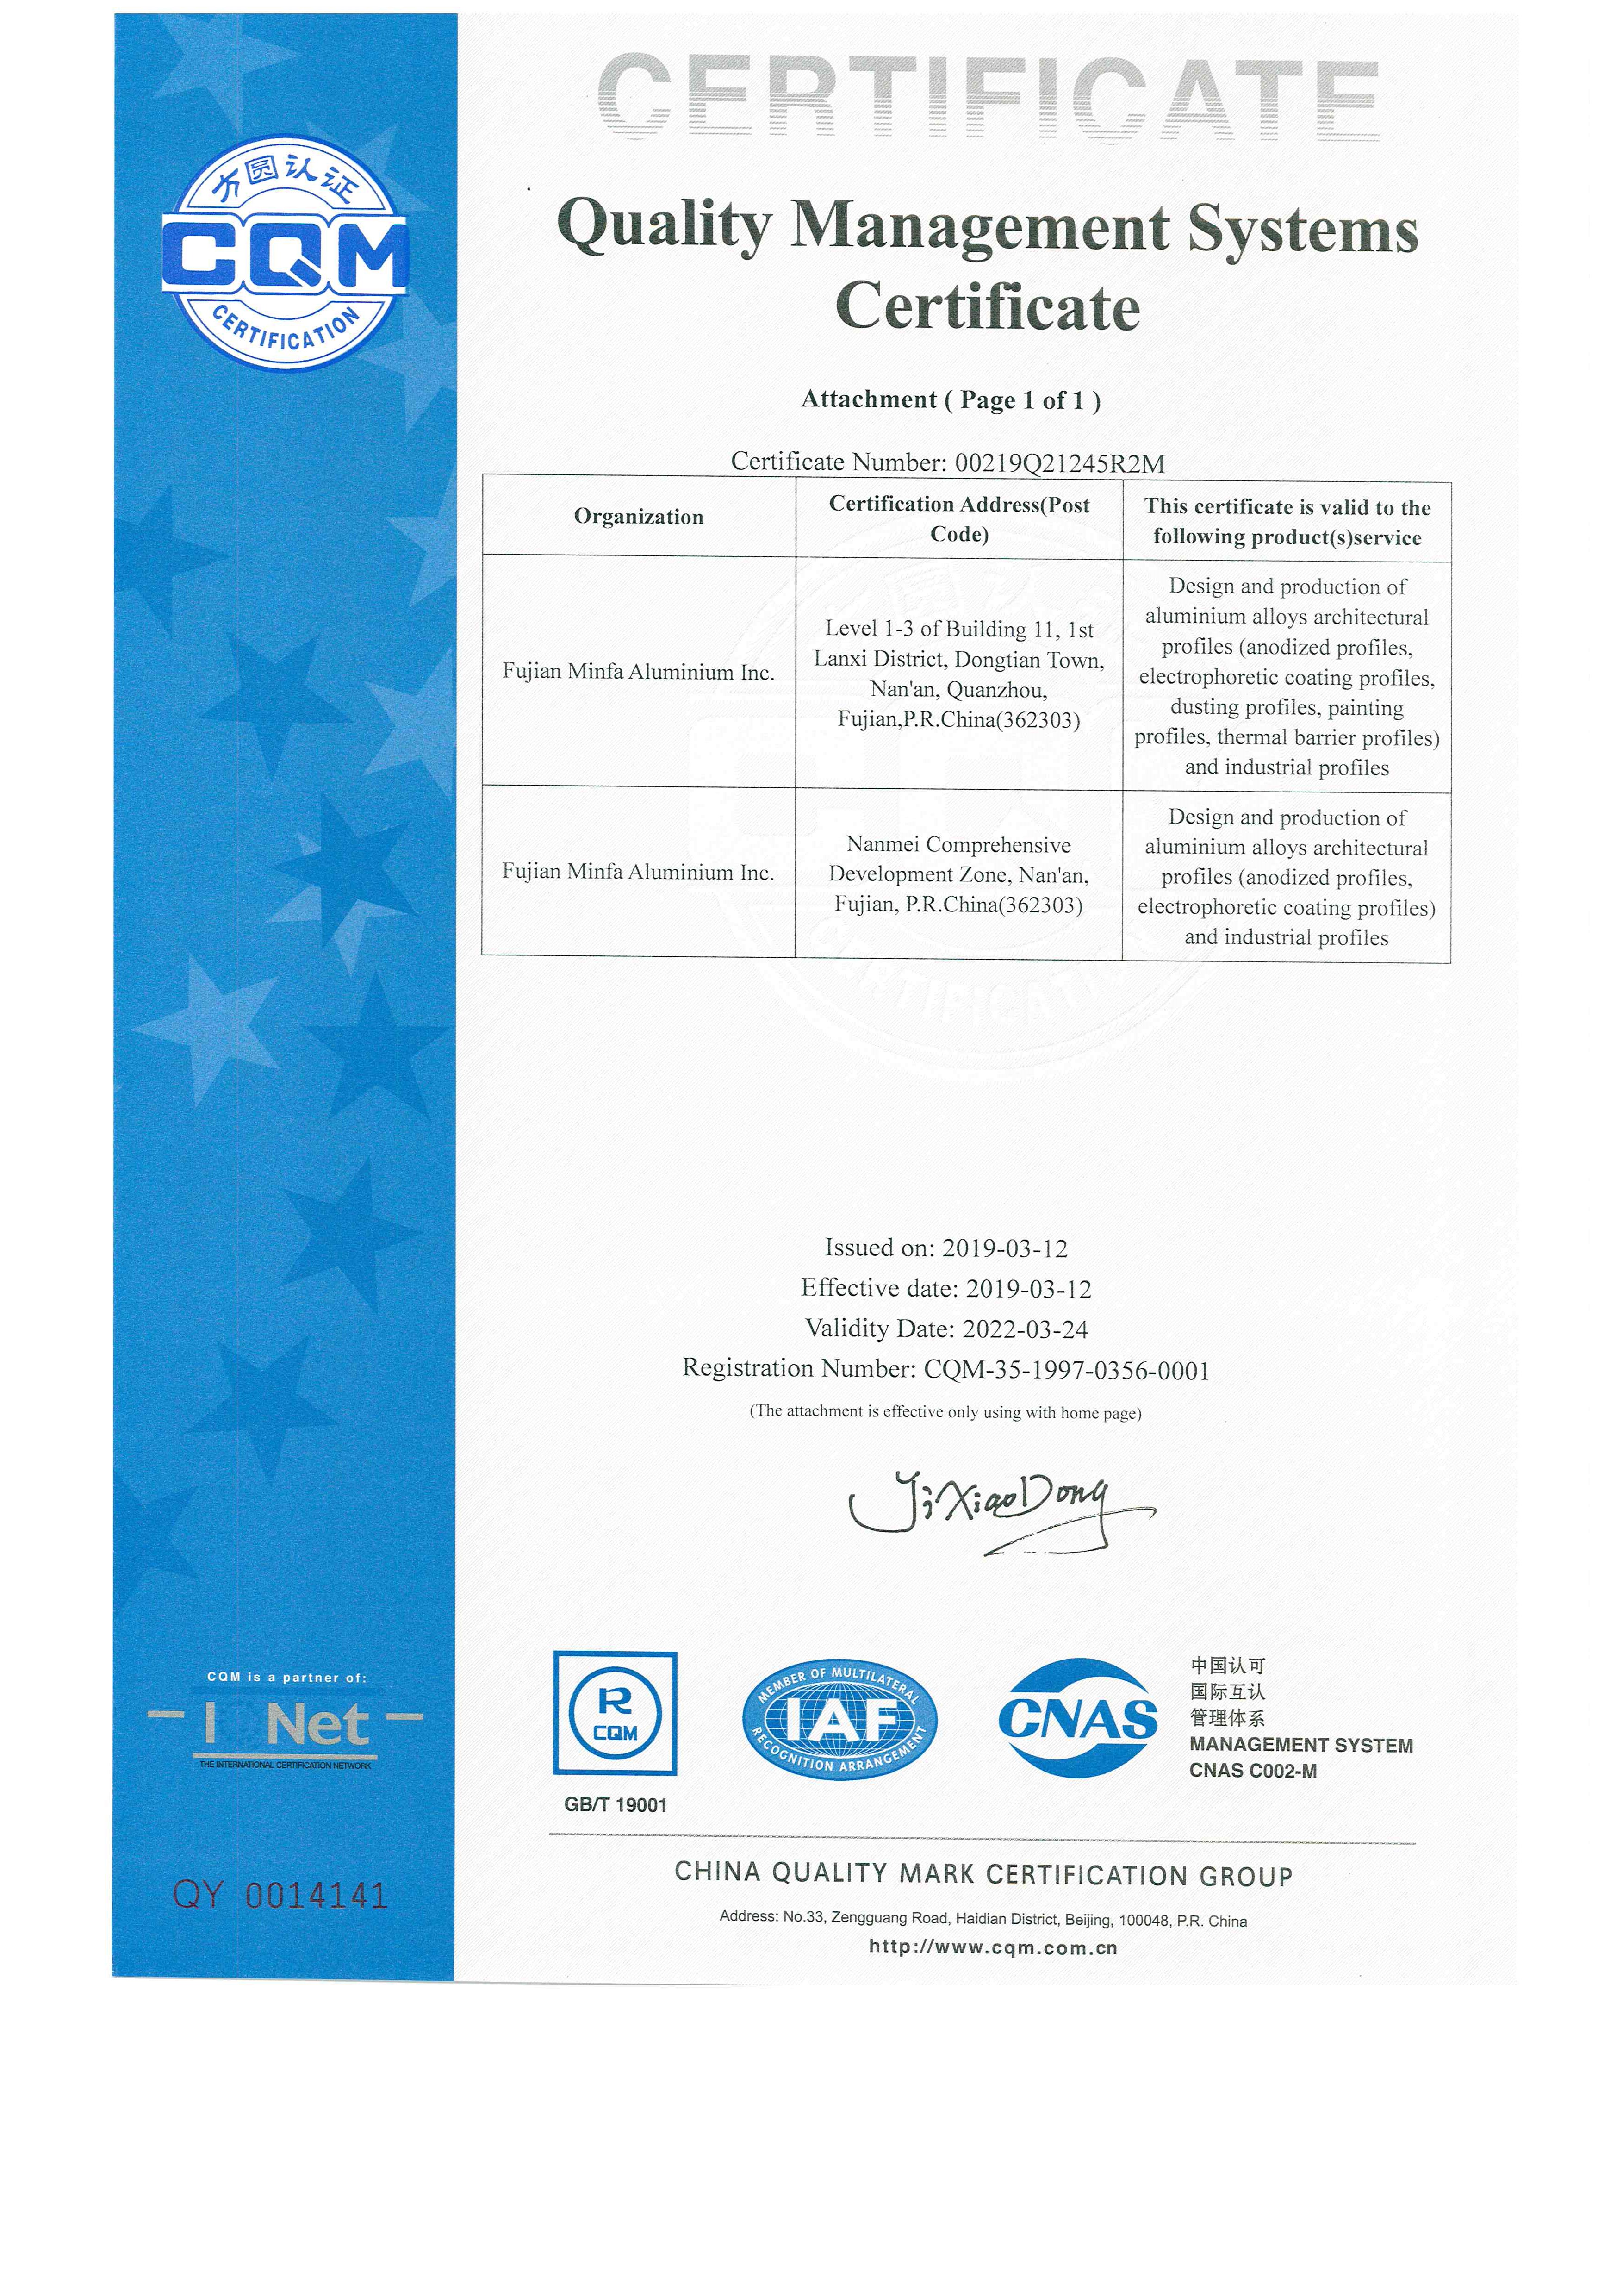 Quality Management Systems Certificate 2.jpg